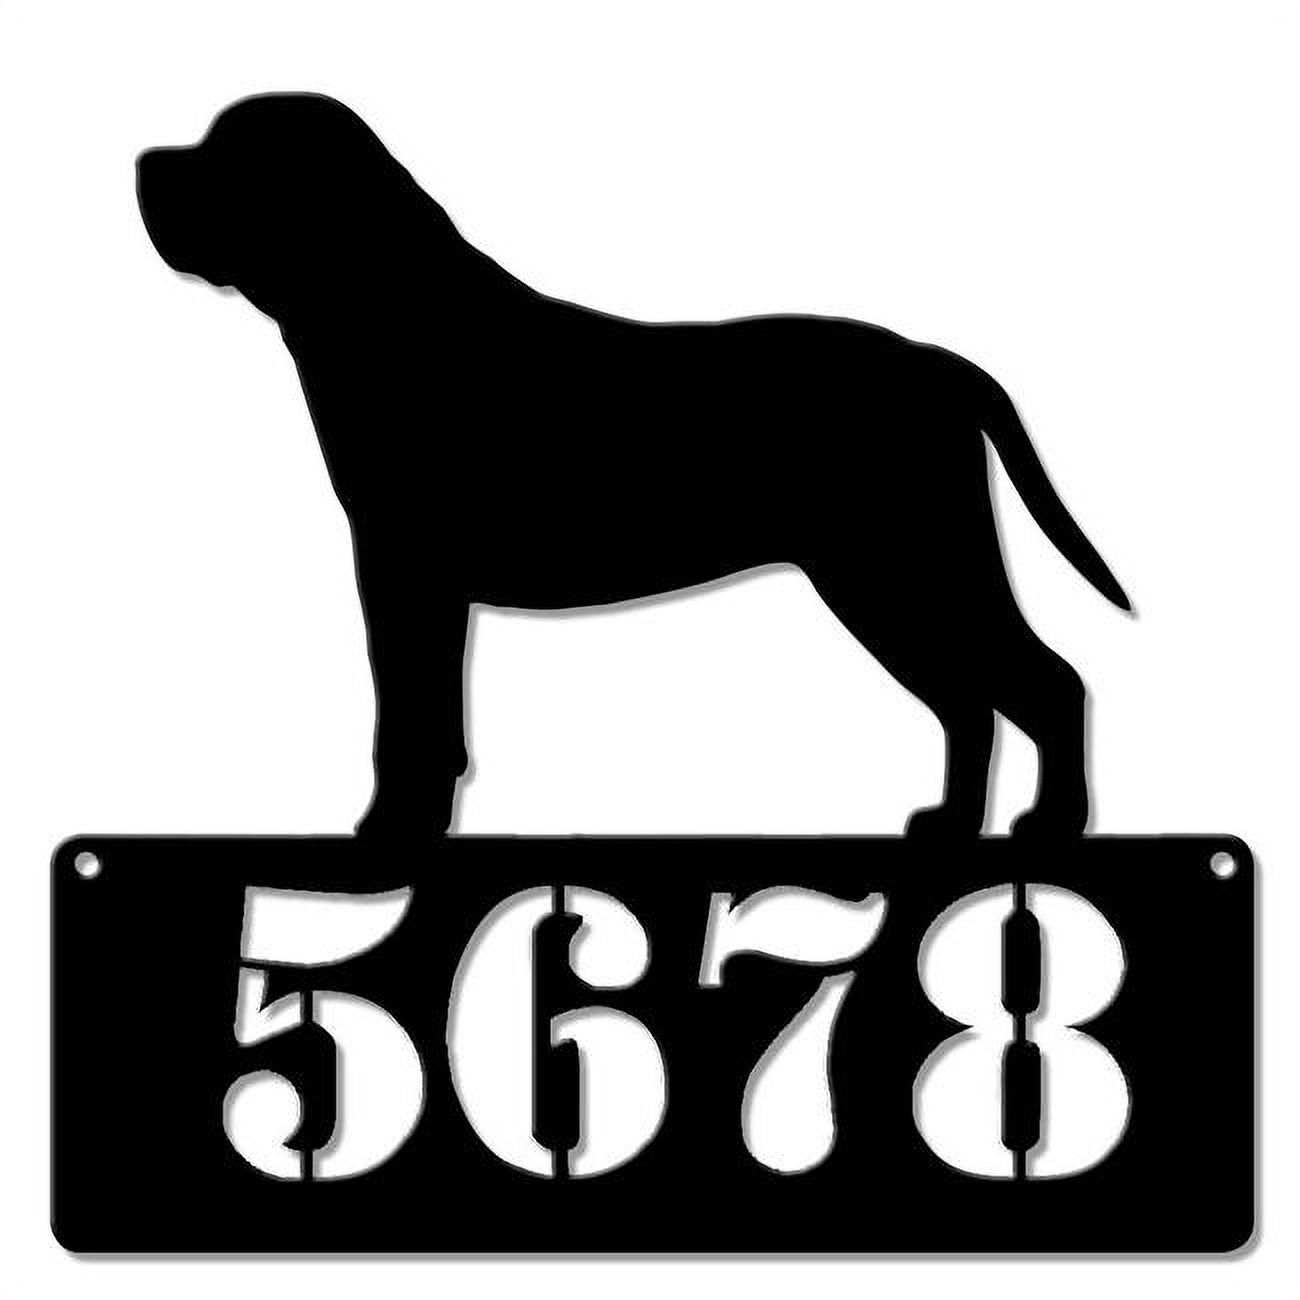 Pasttime Signs PTSD029 15 x 14 in. Mastiff Address Personalized Vintage Metal Sign - image 1 of 1